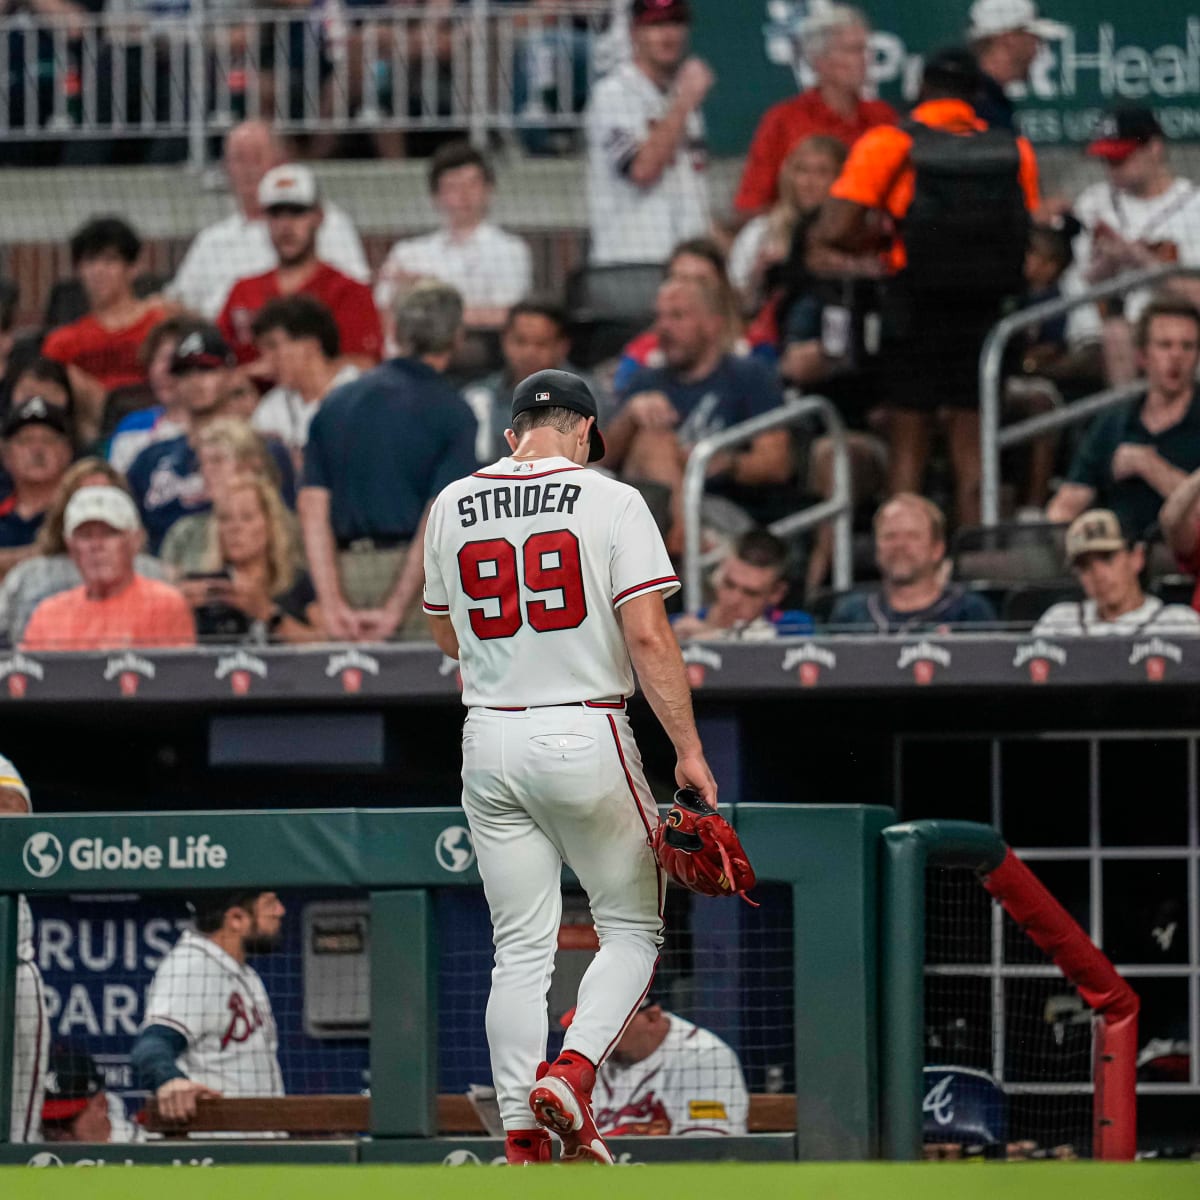 Atlanta Braves Ace Spencer Strider Reveals Hot Take About Fans at MLB Games  - Fastball